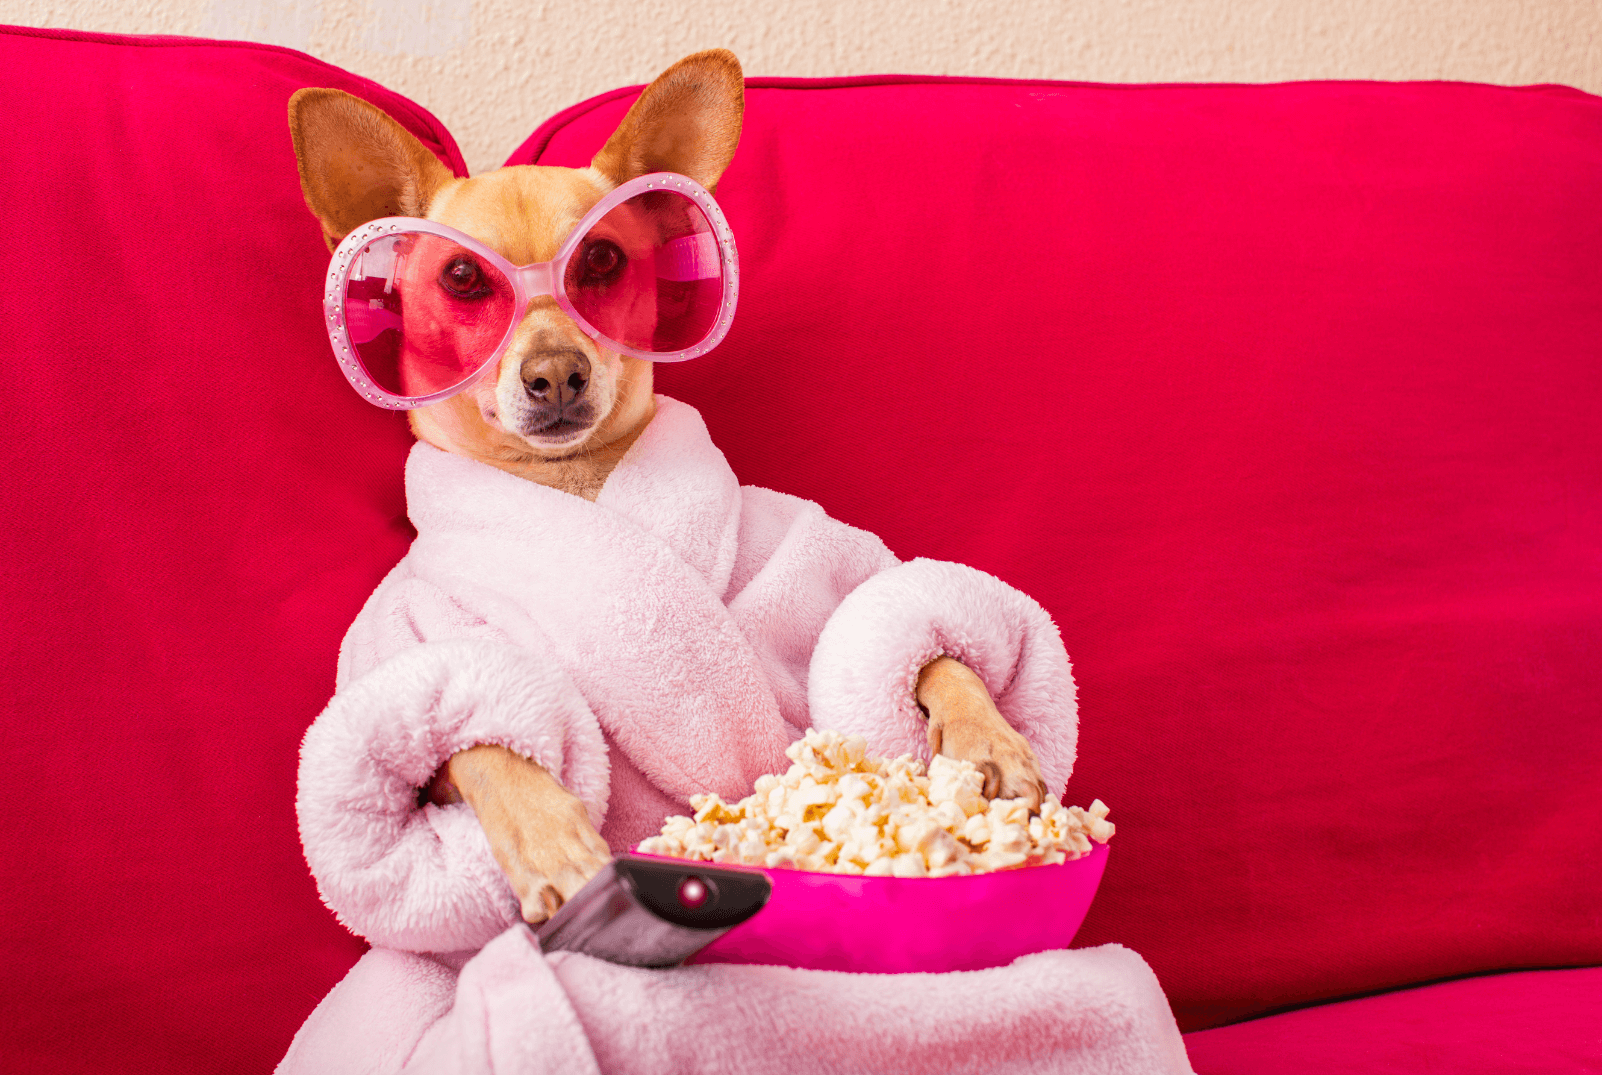 How Can I Safely Feed My Dog a Popcorn